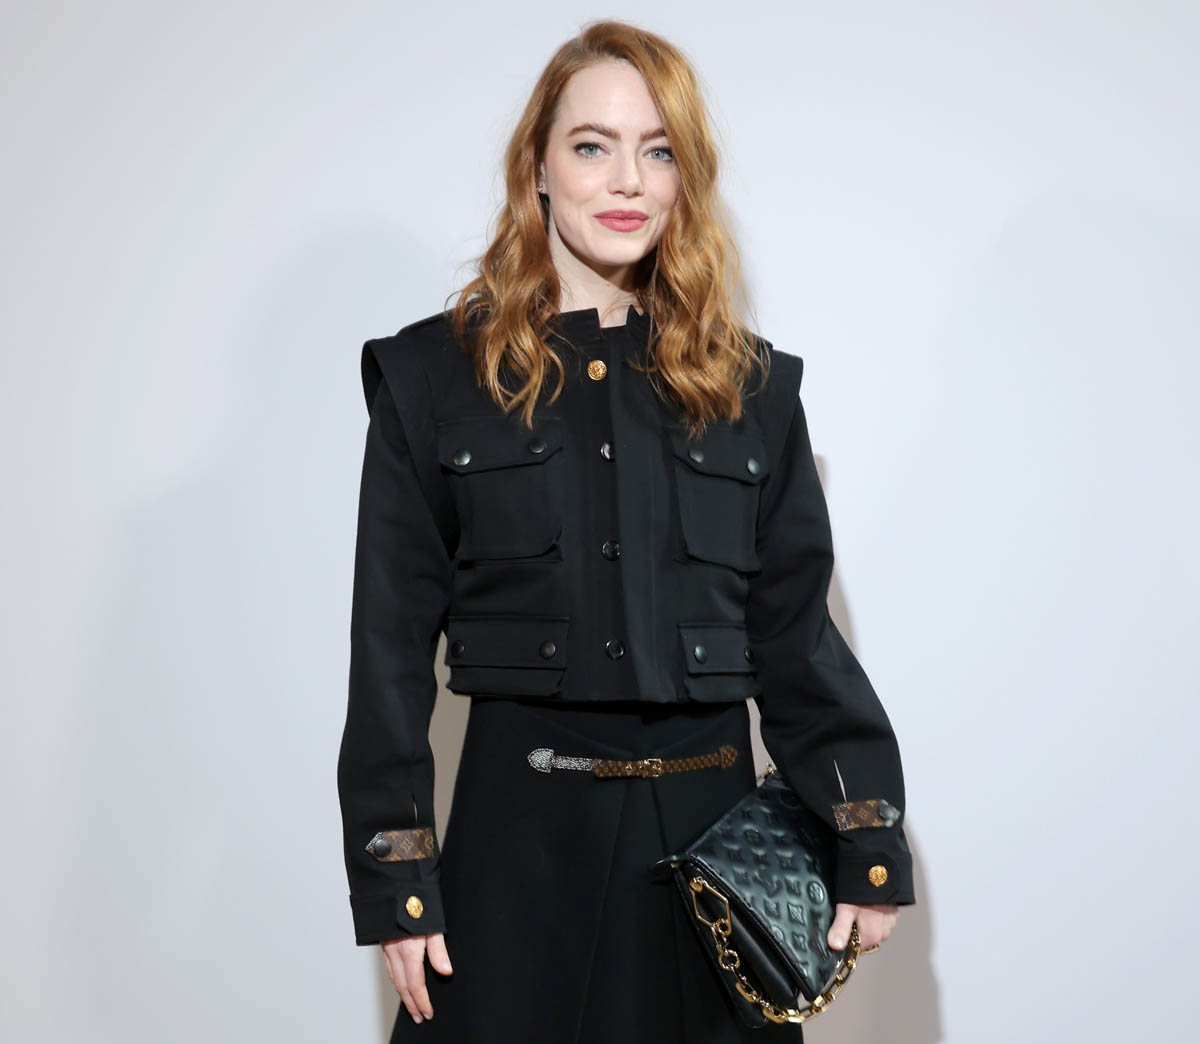 Today's Louis Vuitton presentation in Paris brought out the stars,  including Emma Stone and Julianne Moore